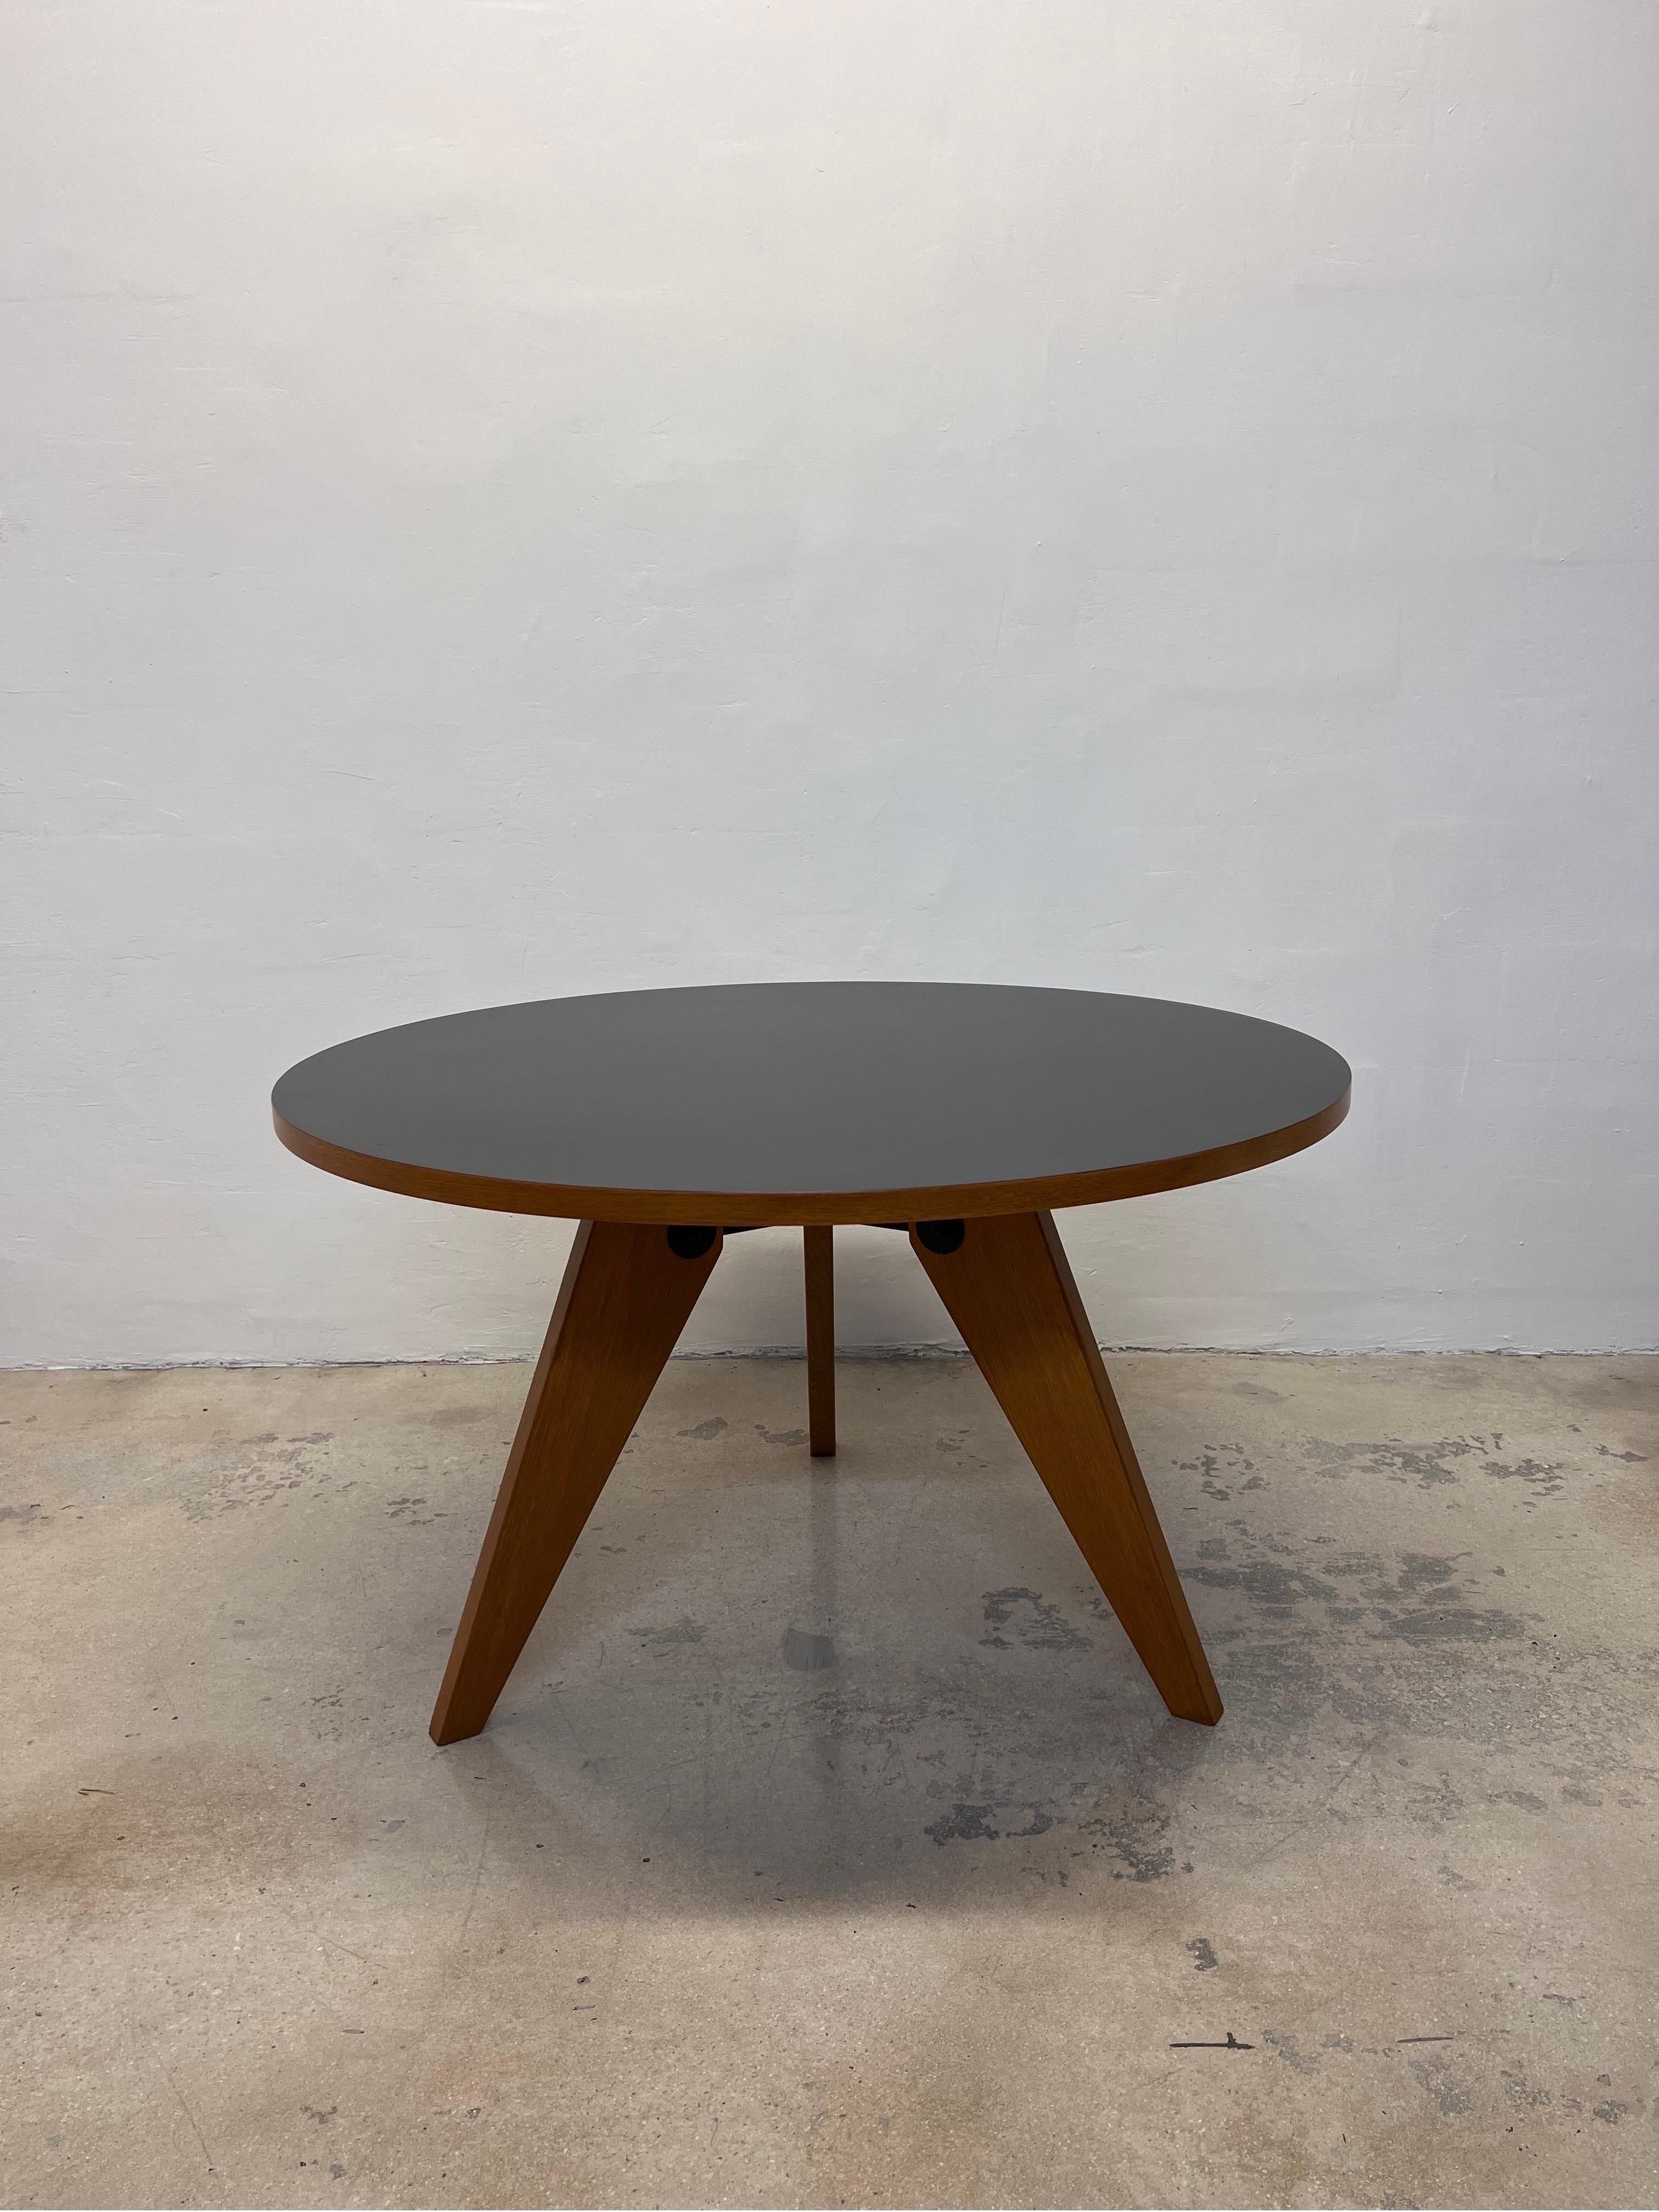 Mid-Century Modern Jean Prouve Gueridon Dining Table in Oak with Matte Black Top for Vitra, 2002